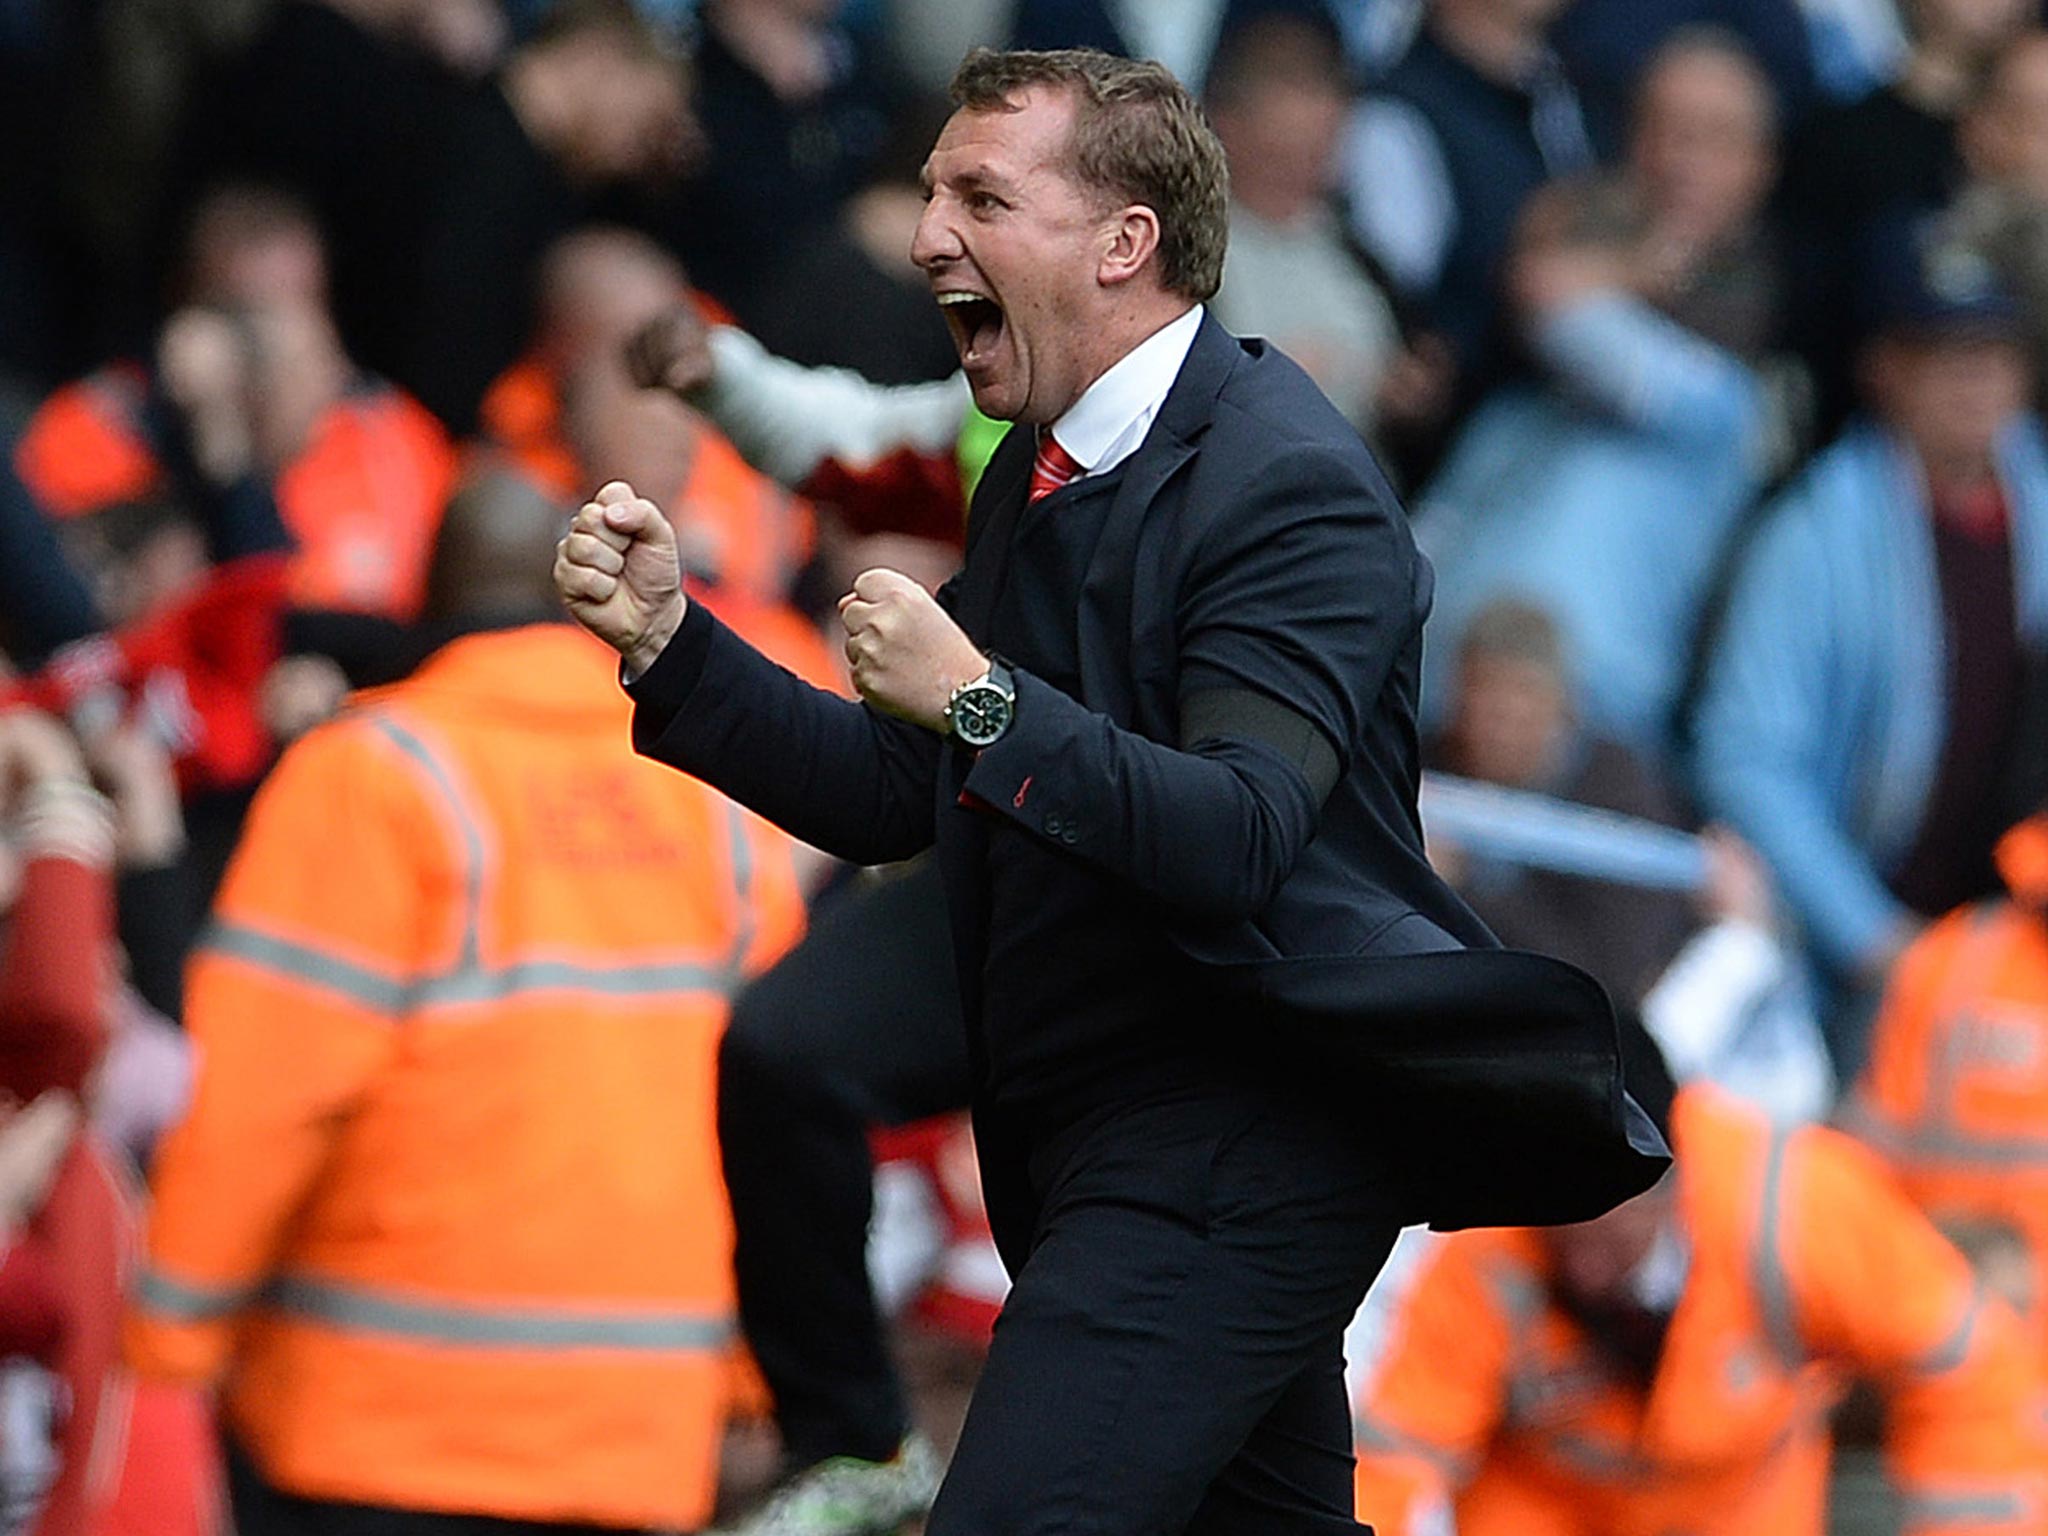 Brendan Rodgers celebrates the 3-2 victory over Manchester City that keeps his Liverpool side top of the Premier League